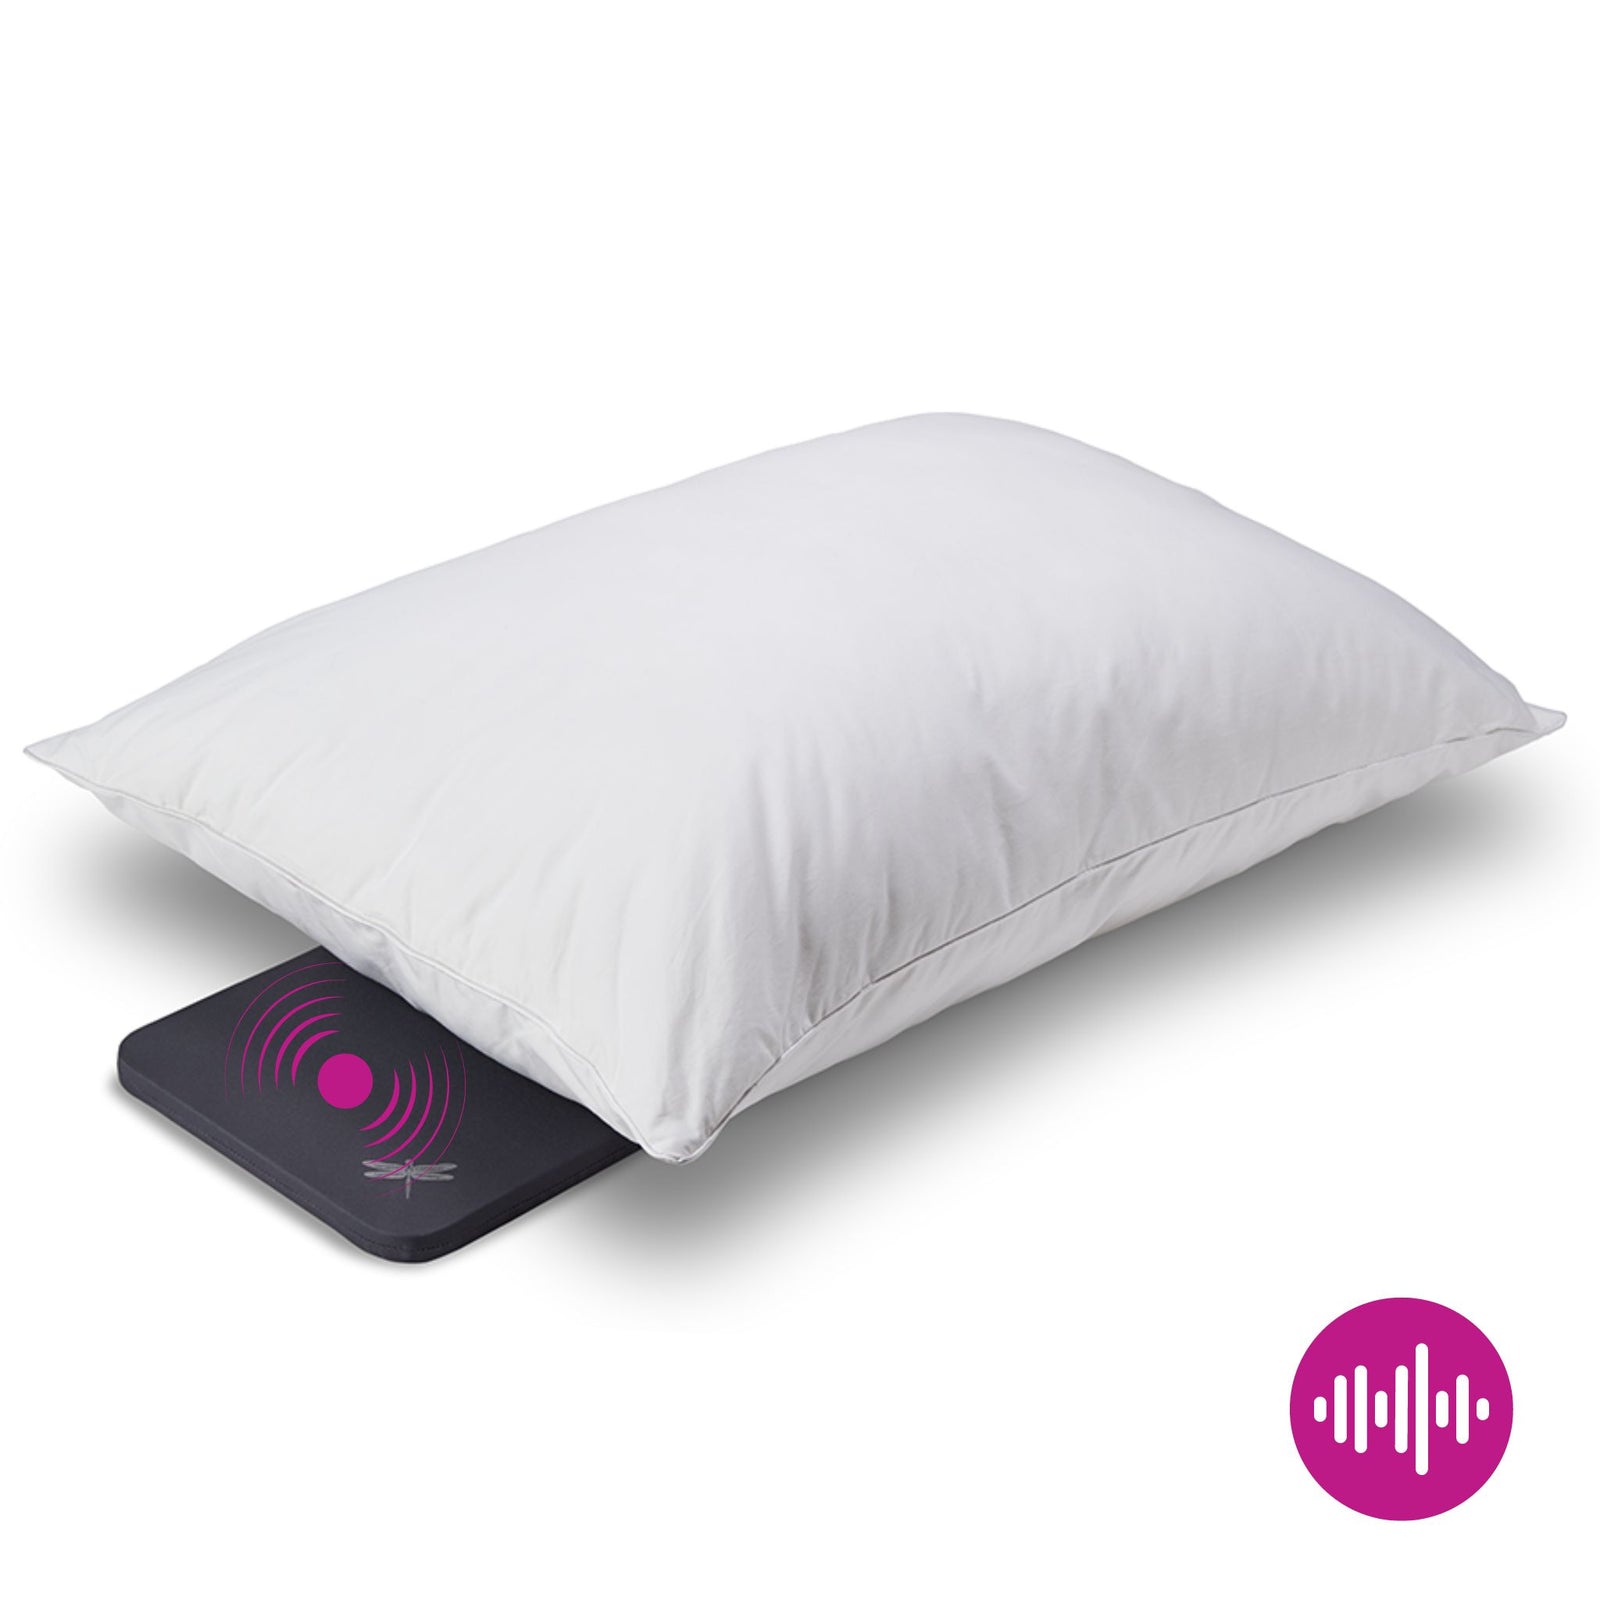 Amazing Dreampad Sound Pillow: Exciting New Pillow Speaker Technology